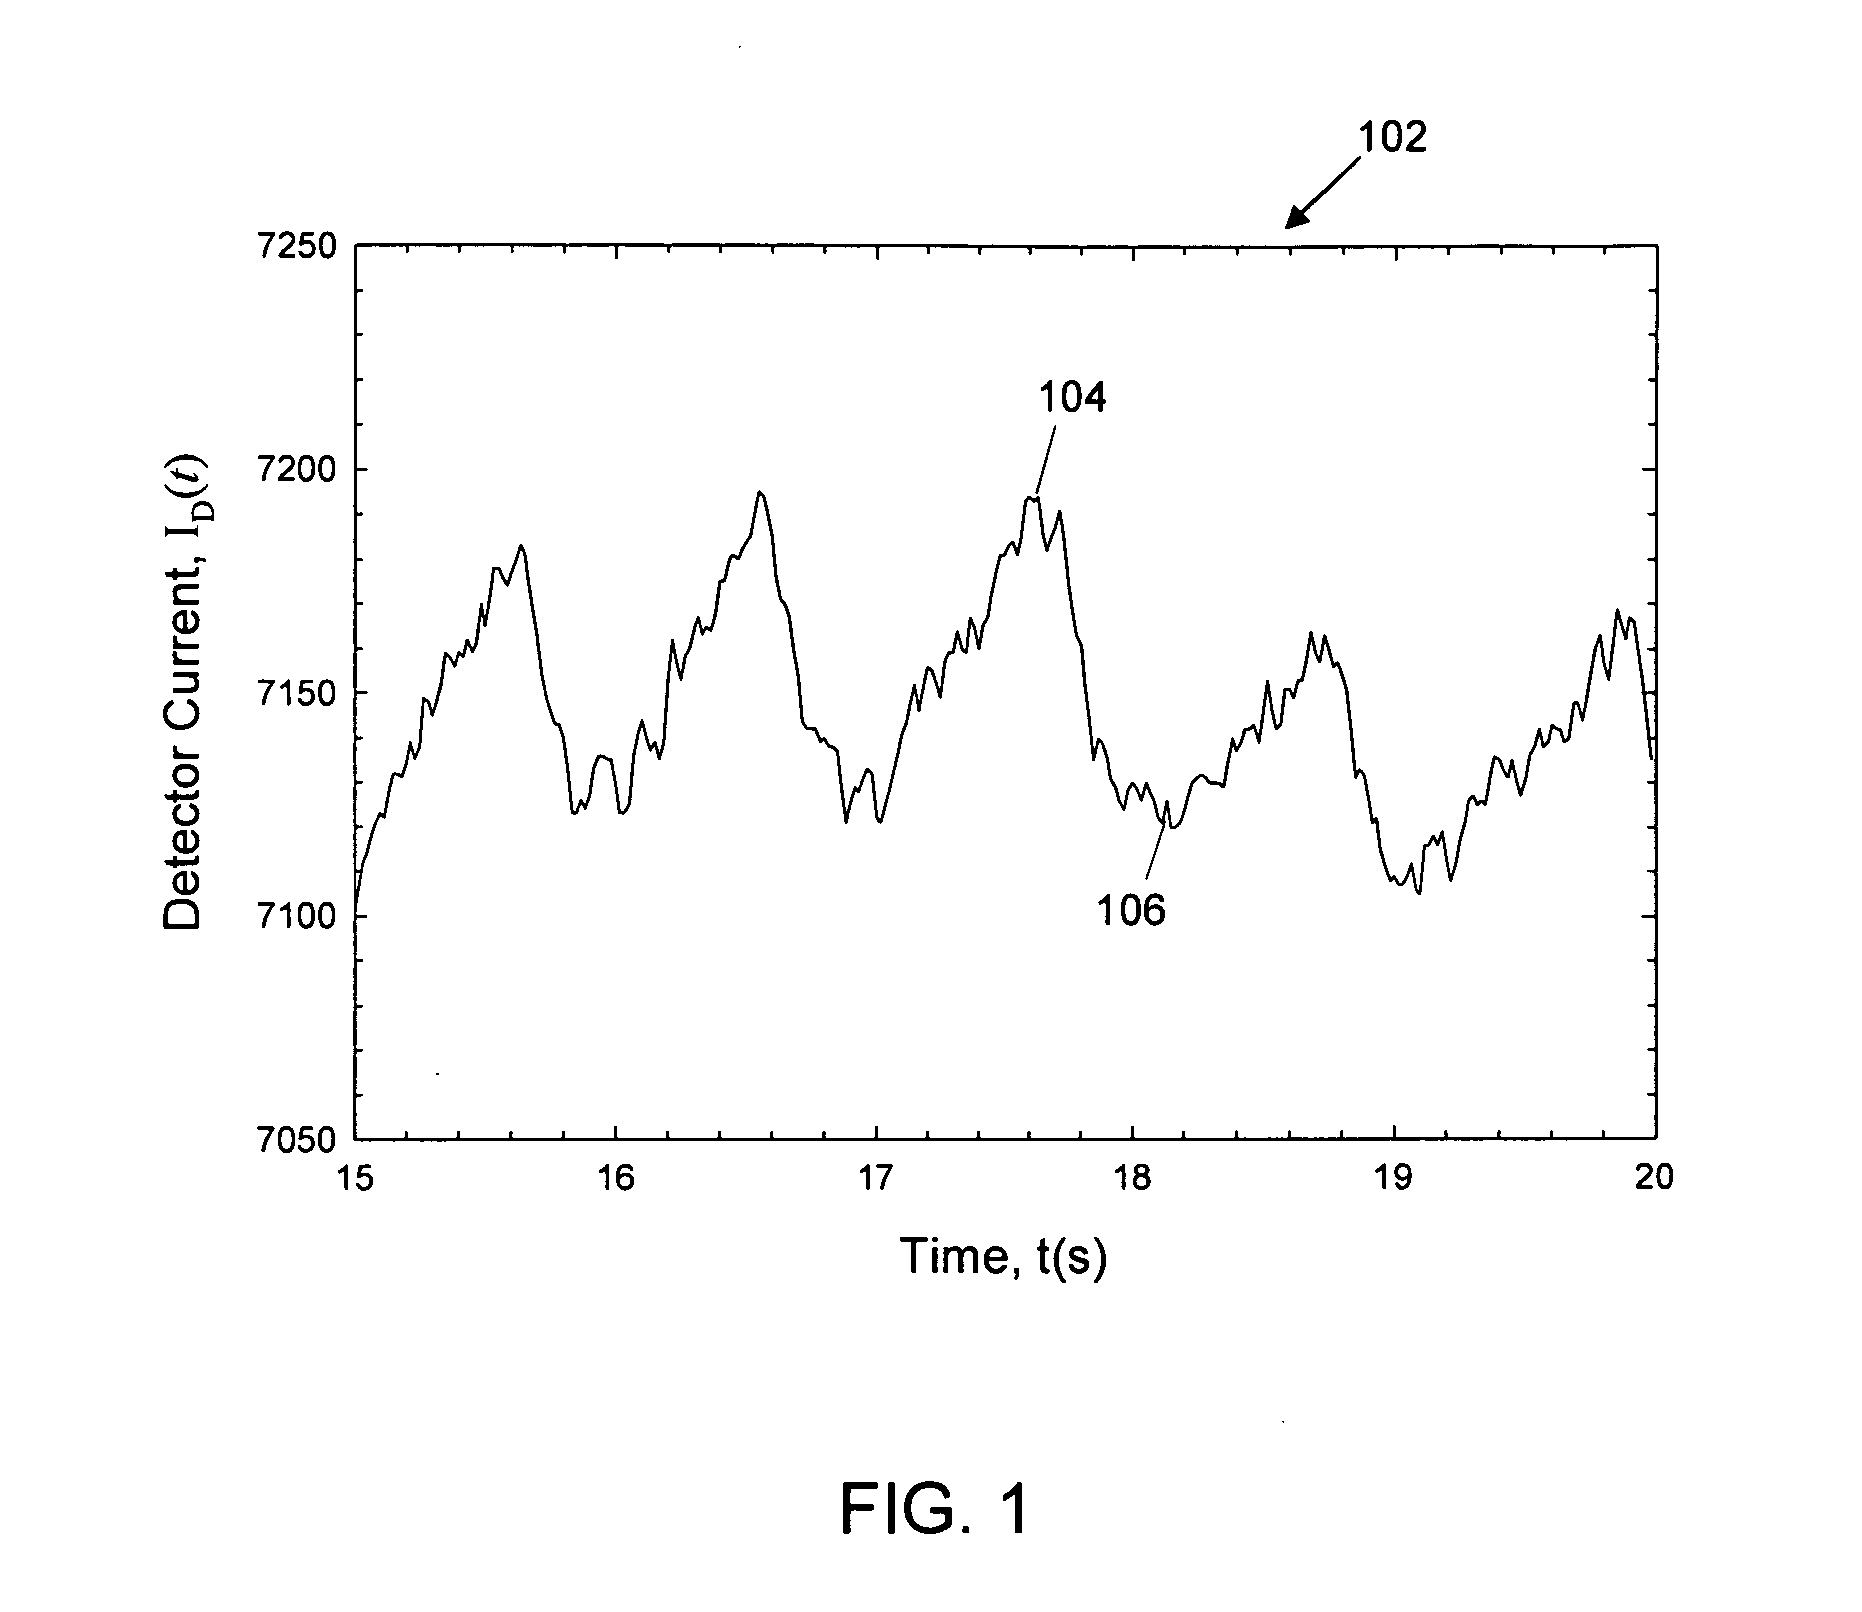 Method and System for Non-Invasive Optical Blood Glucose Detection Utilizing Spectral Data Analysis